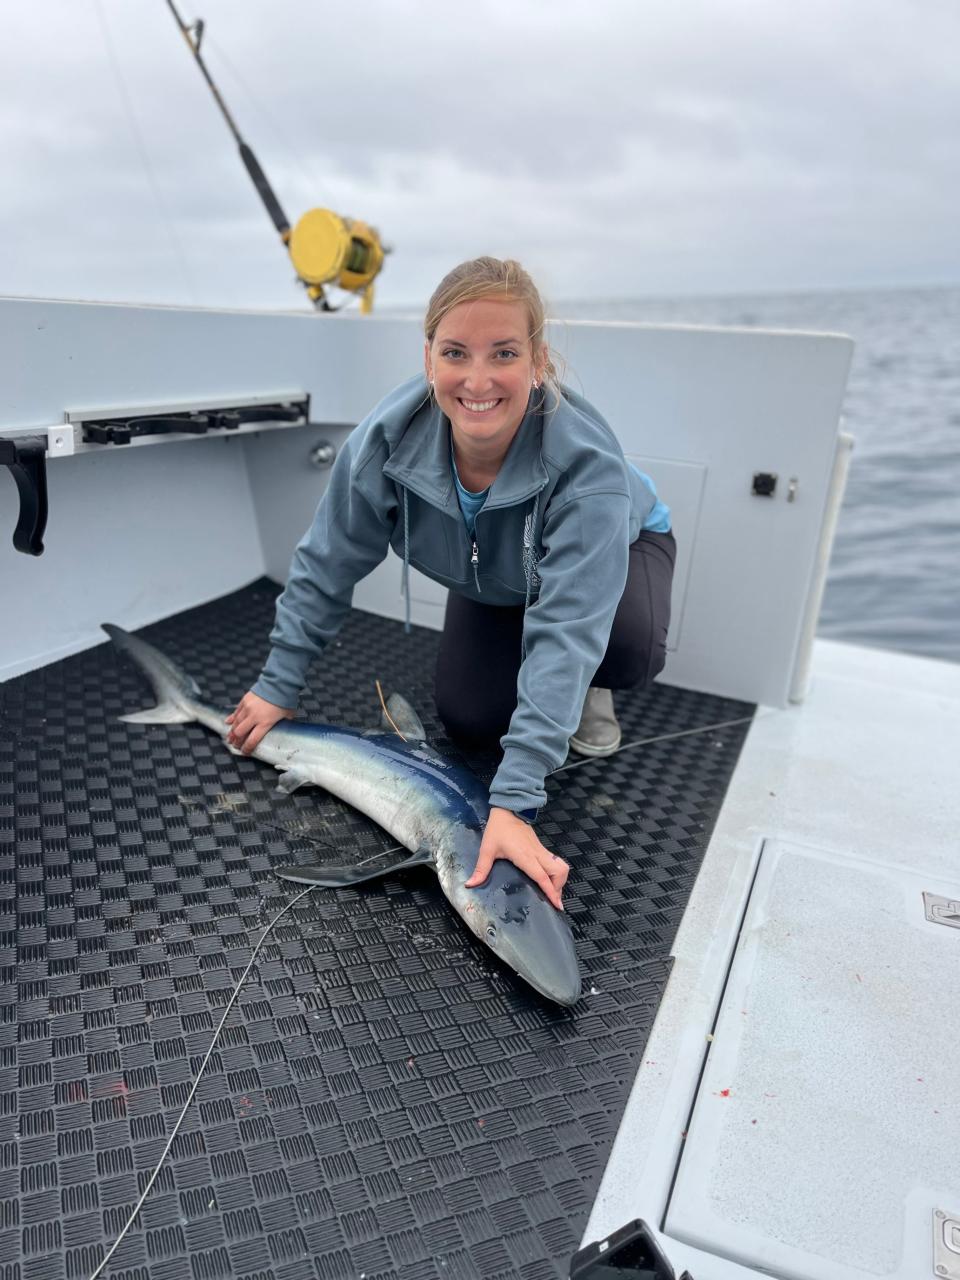 Harte Research Institute Center for Sportfish Science and Conservation assistant research scientist Kesley Banks will appear in Discovery's 2023 Shark Week.